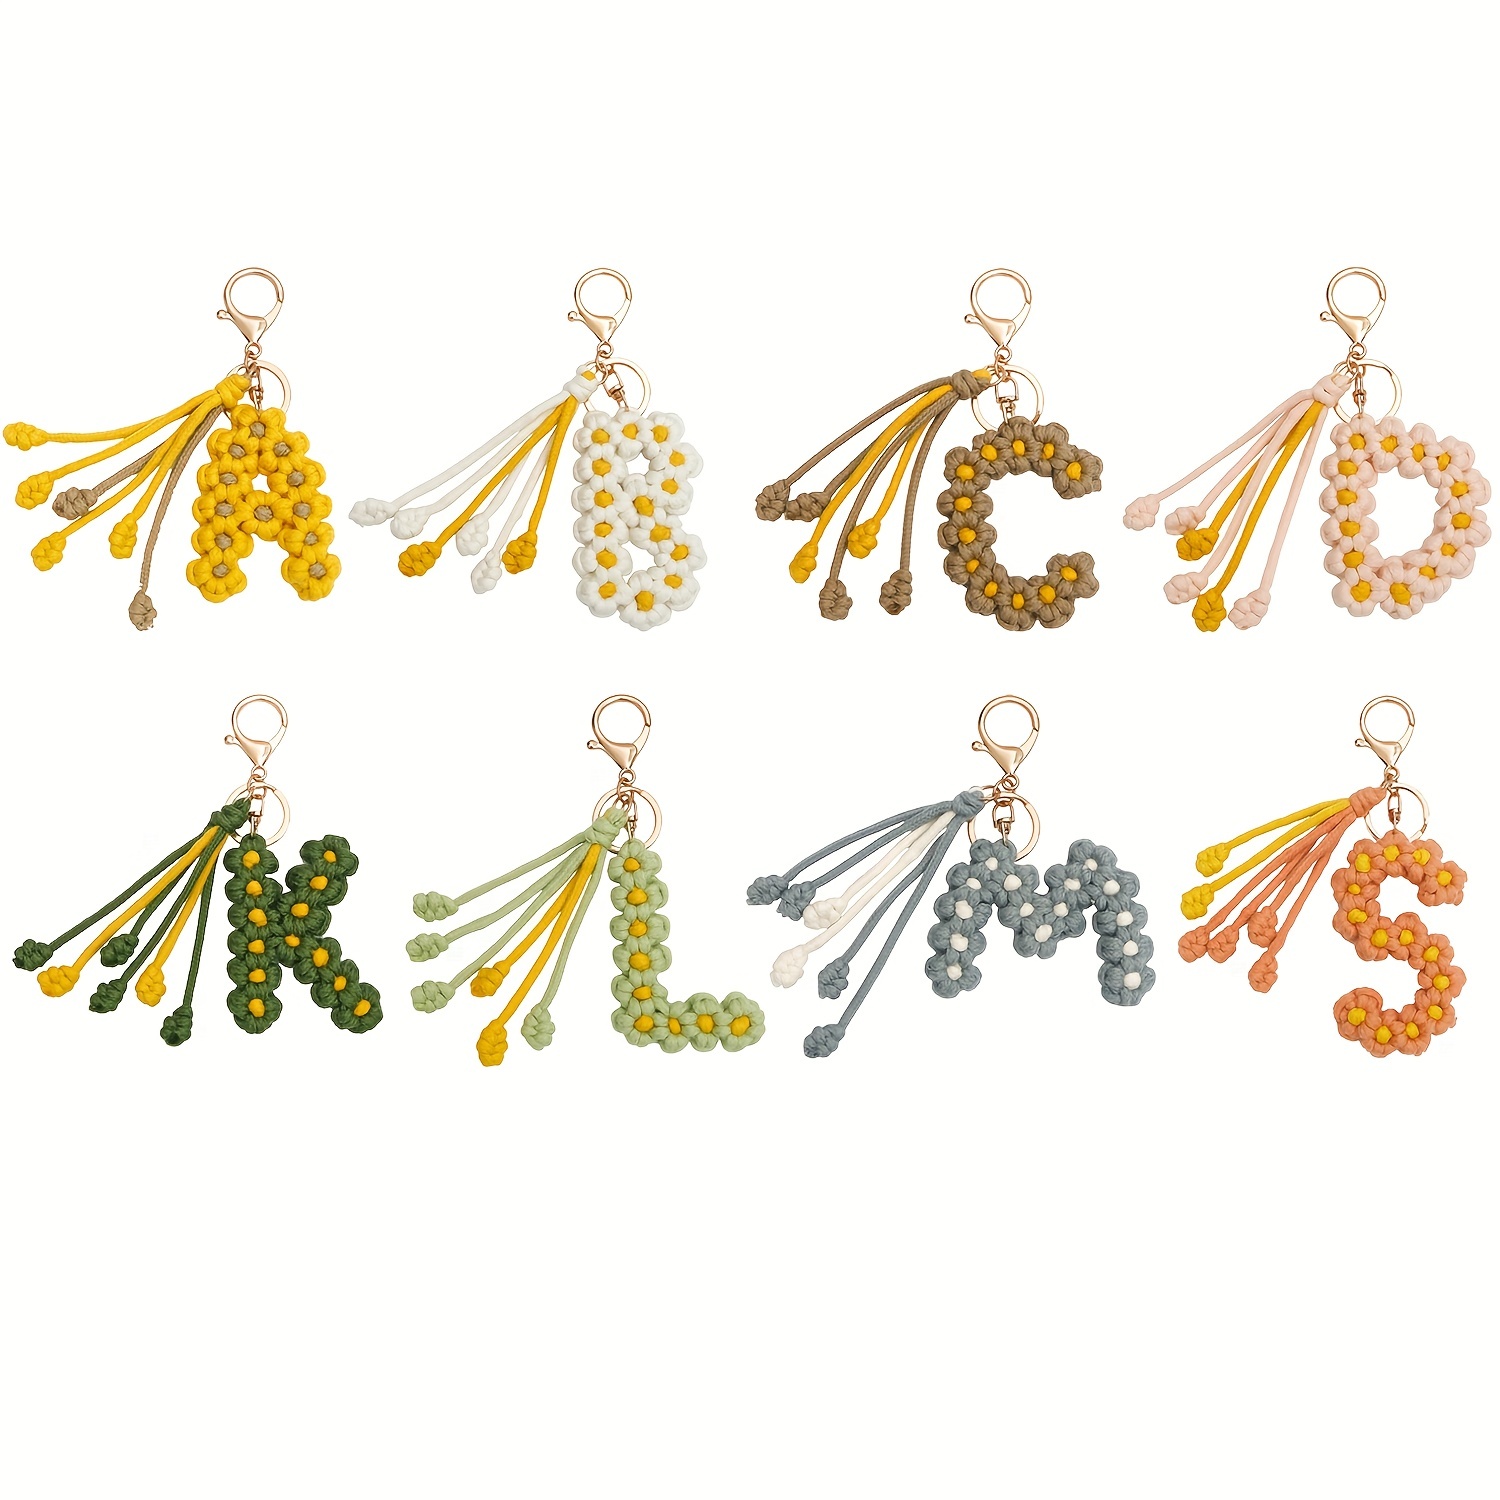 52pcs Random Mixed Shape Ancient Letters Charms Gold 26 Letter Pendants For  DIY Necklace Keychain Jewelry Gifts Making Tools Bracelet accessories arrow